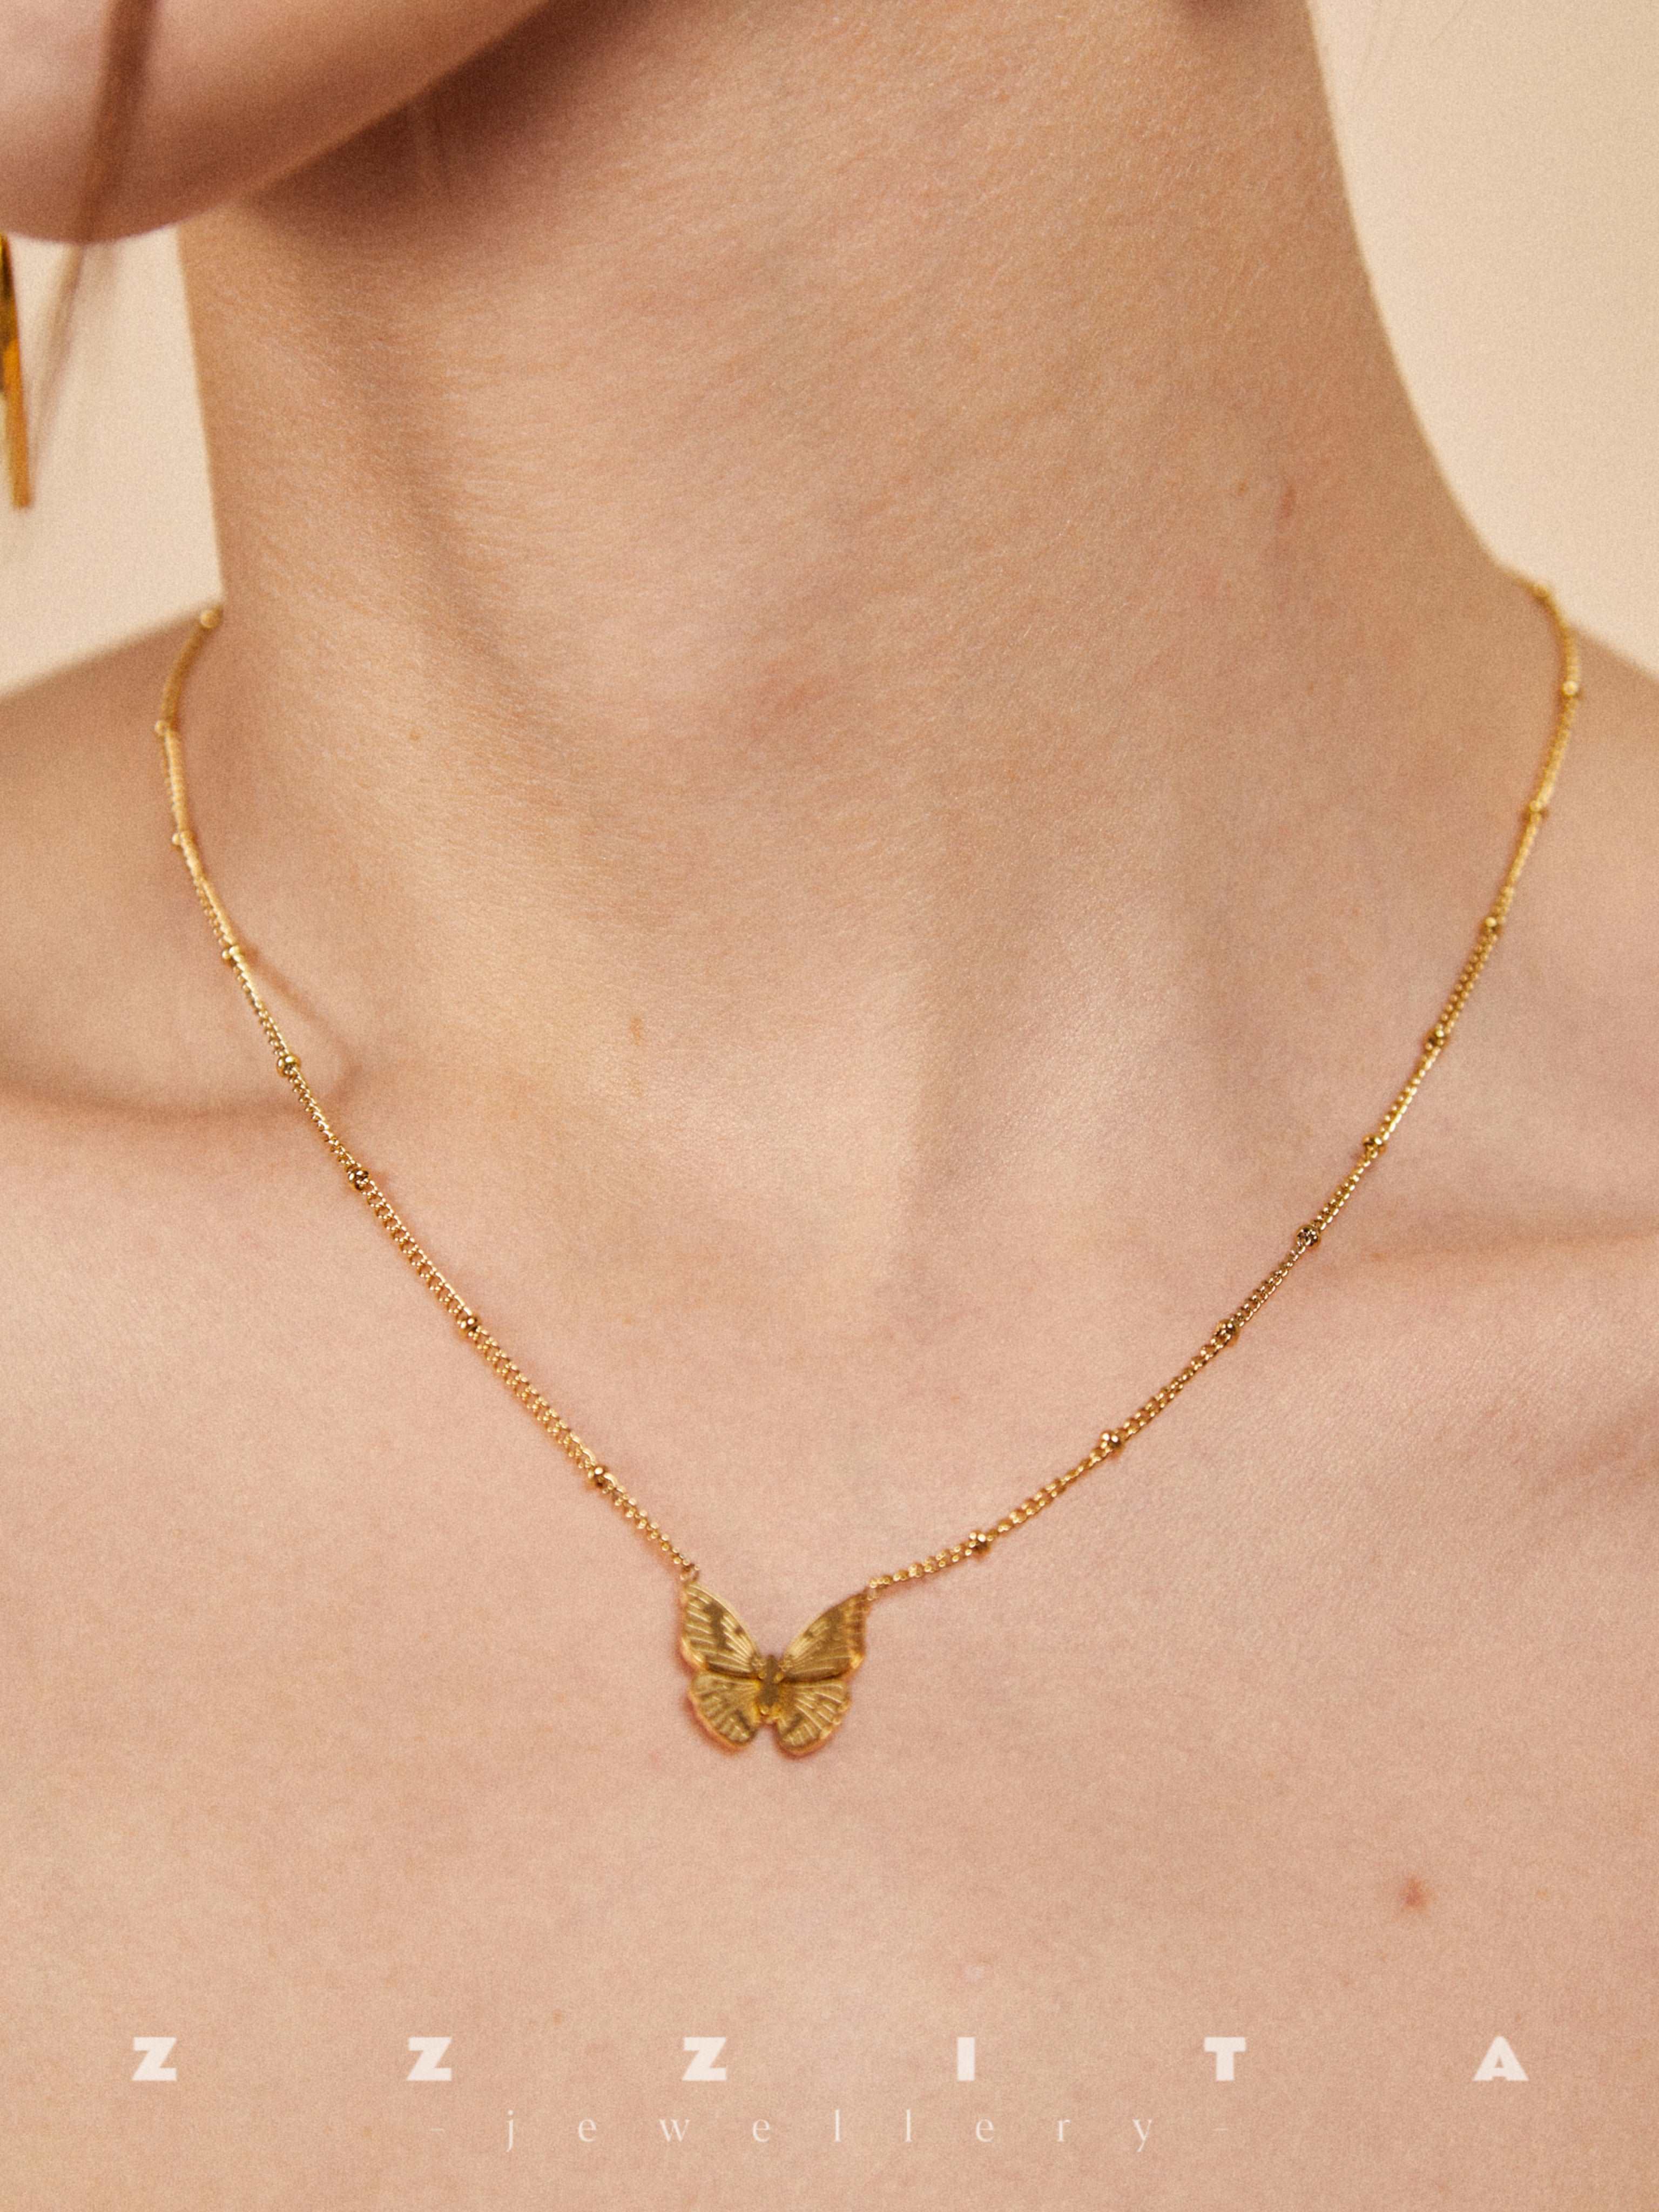 wearing gold butterfly necklace